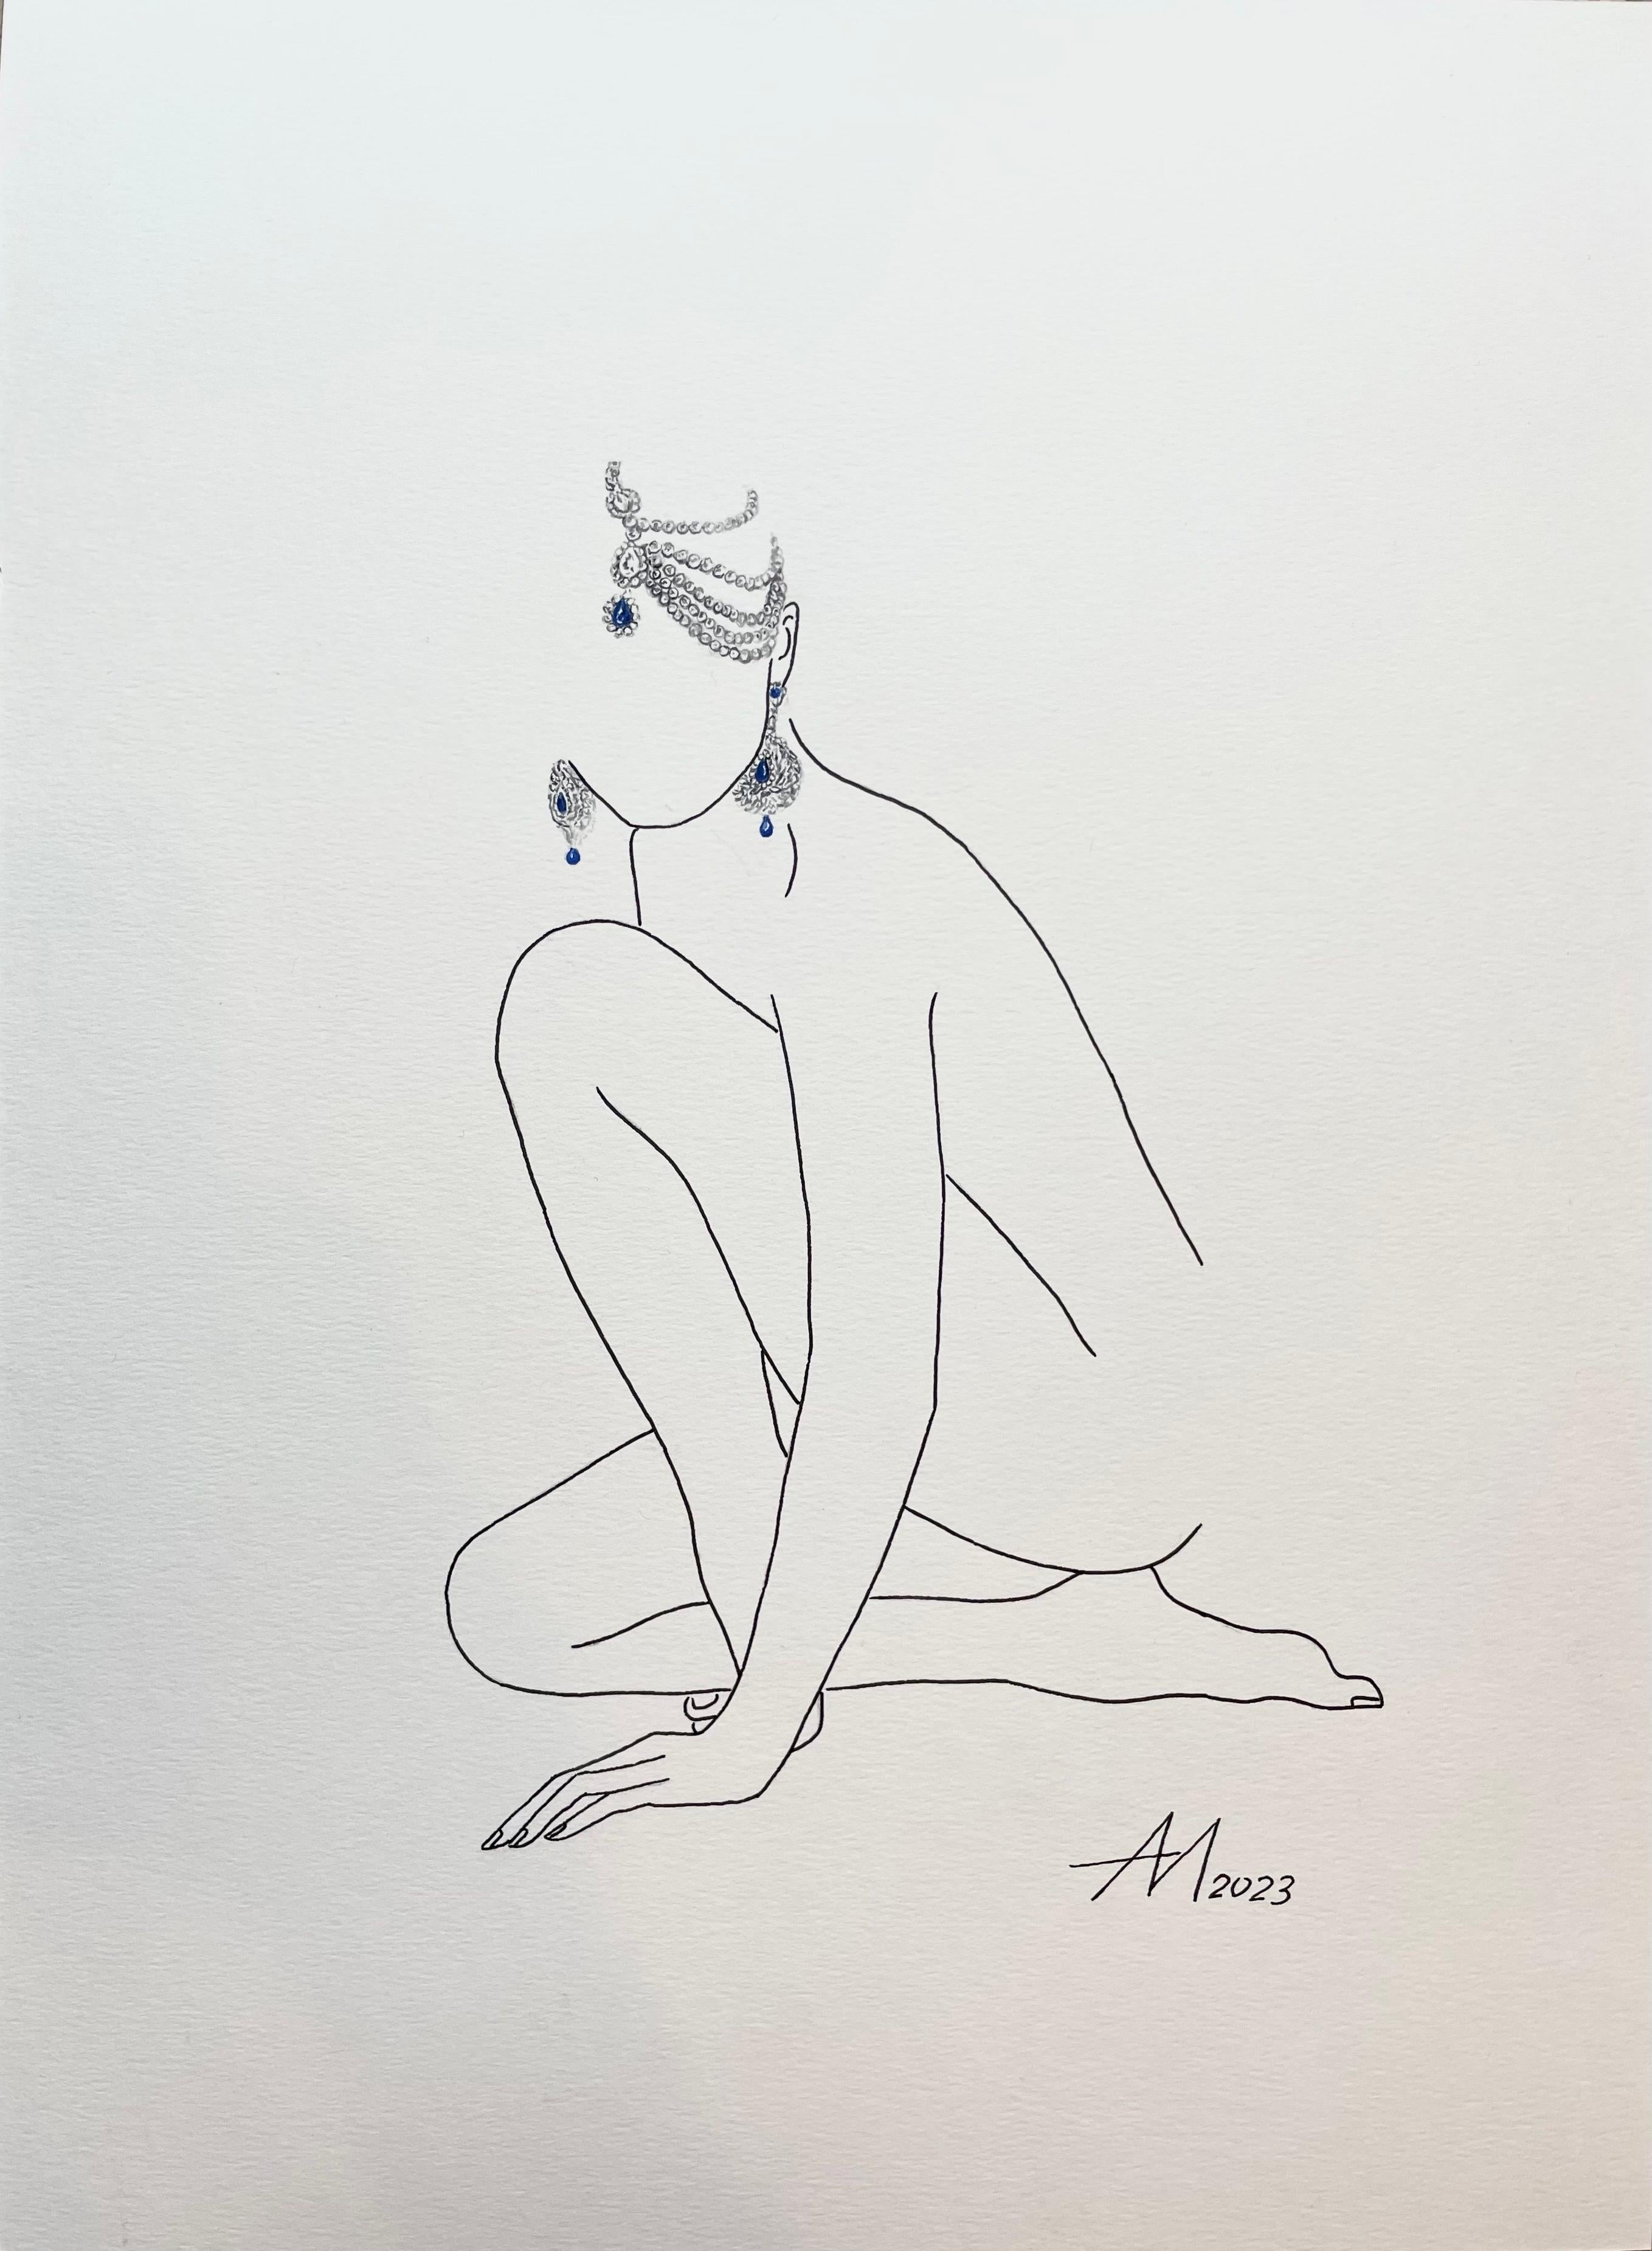 Mila Akopova Abstract Painting - Waiting for the Maharaja- line drawing woman figure with jewelry